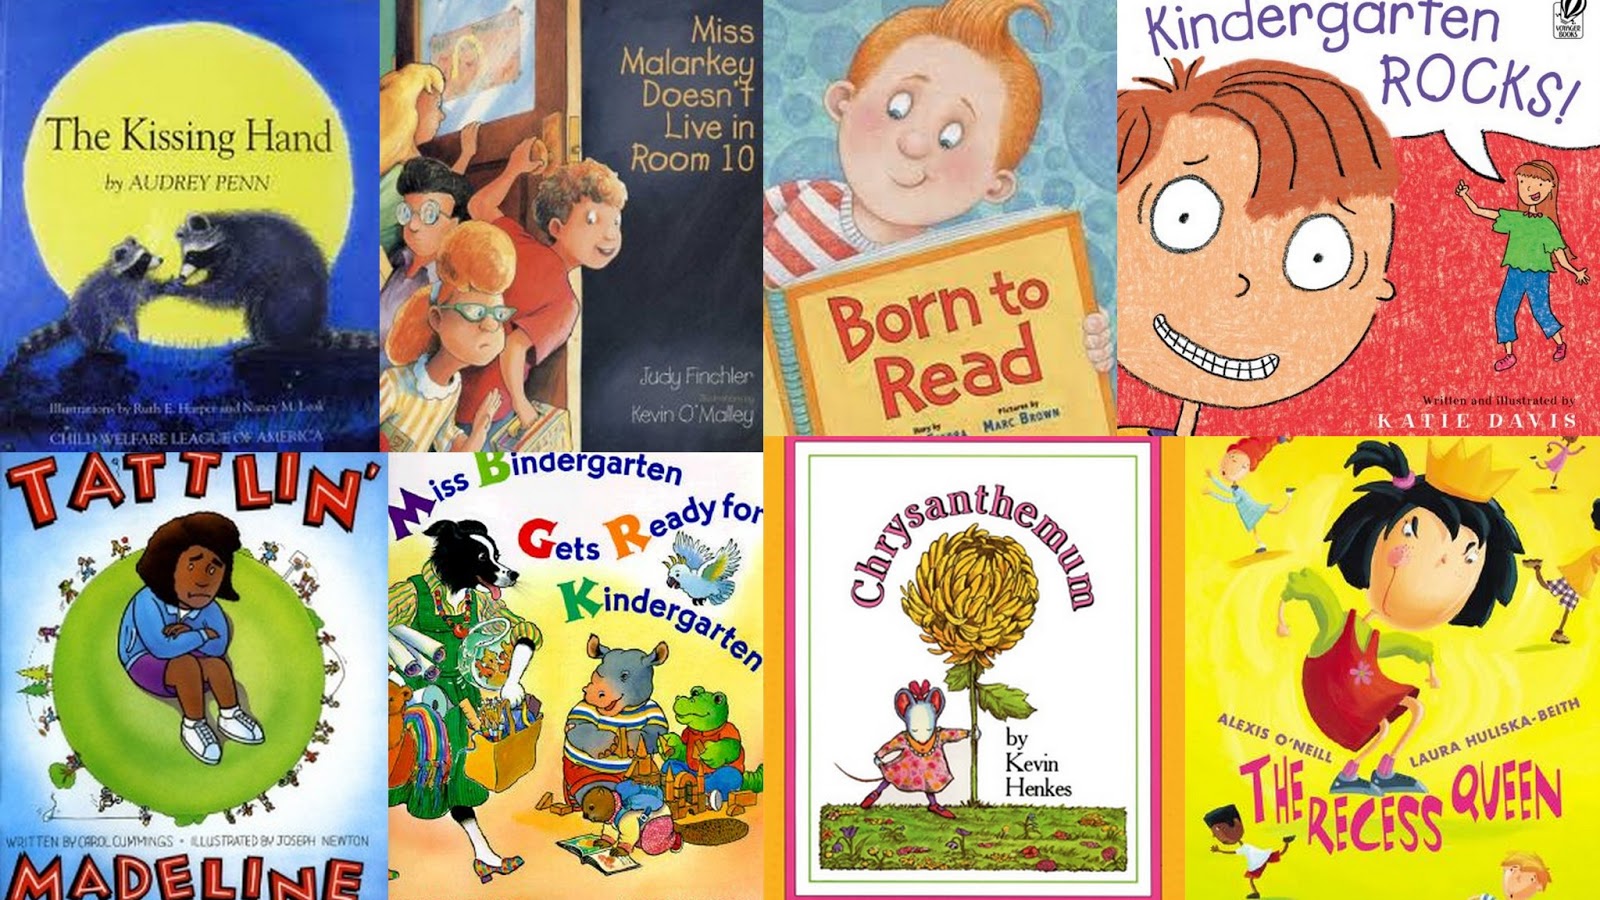 Last day to enter and Picture book party! - Kickin' It In Kindergarten